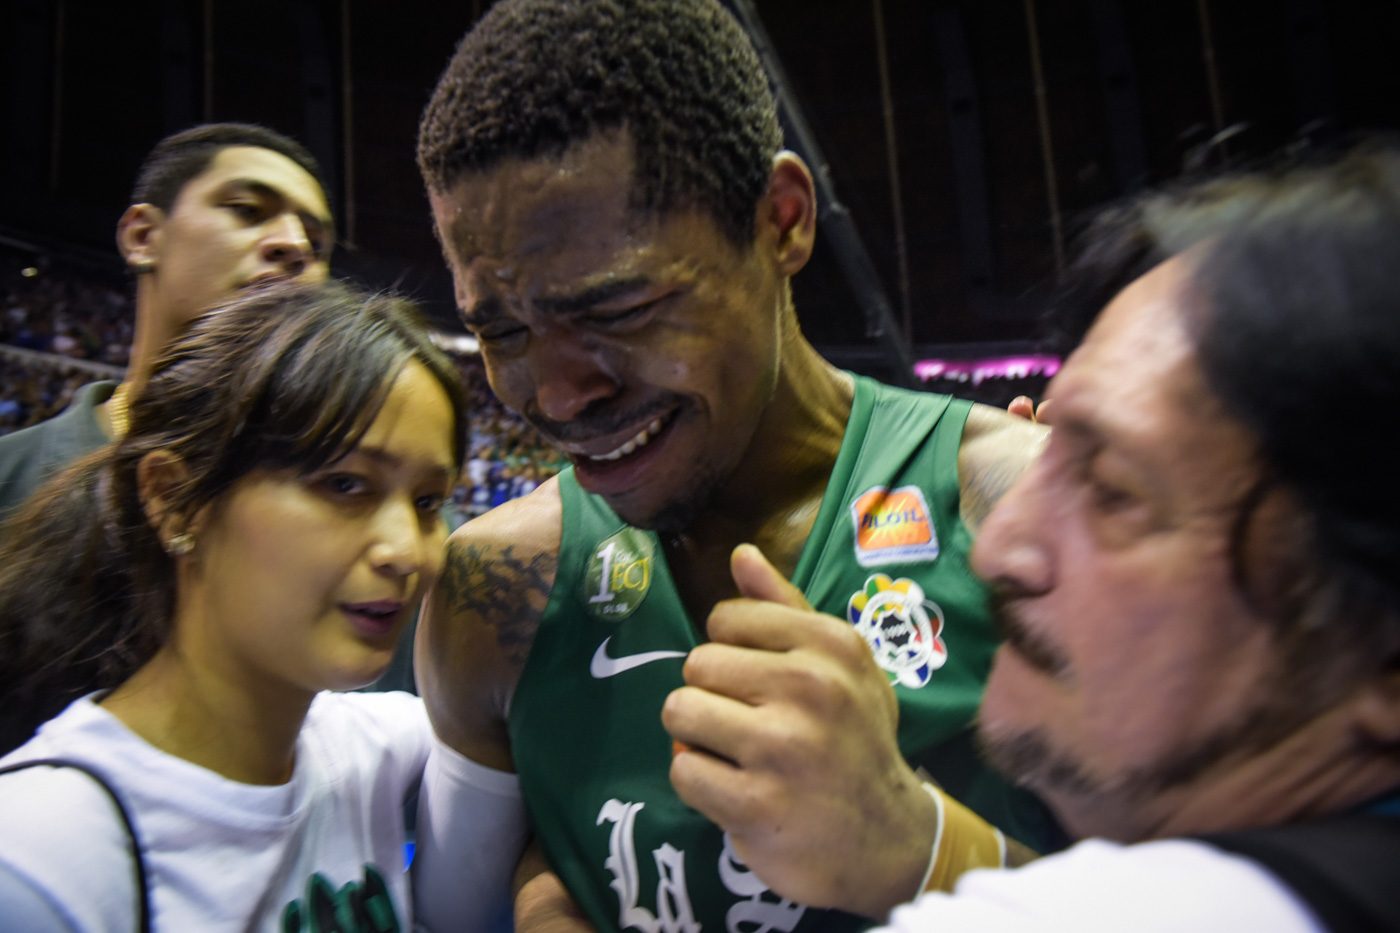 SEASON 81. Ben Mbala will be back in Season 81 for his last year of eligibility in the UAAP. Photo by Alecs Ongcal/Rappler 